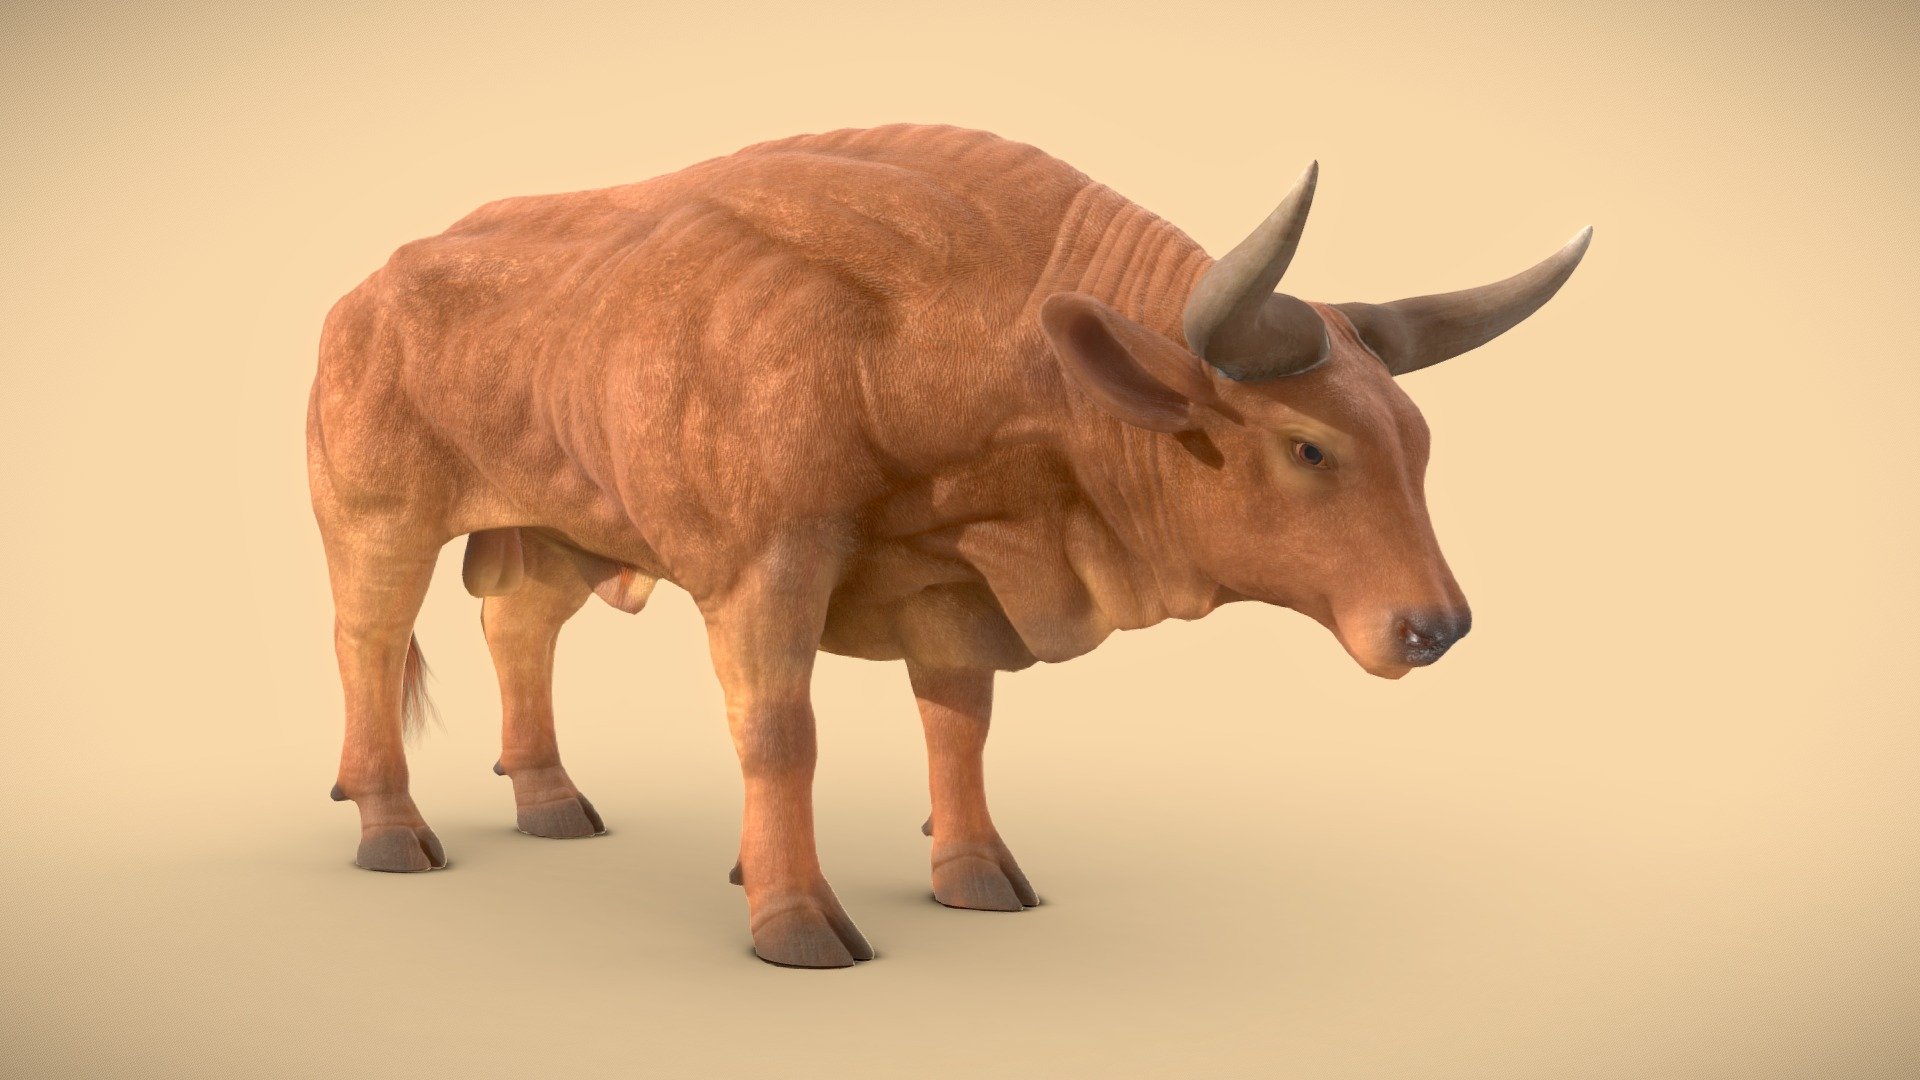 Realistic muscular majestic bull model for AR/VR apps, games and movies. created with 3ds max, maya, substance painter, zbrush and photoshop. Ready to use for any types of rig and animations. It includes variteies of 4K resolution of maps for details.
Animations under progress 3d model